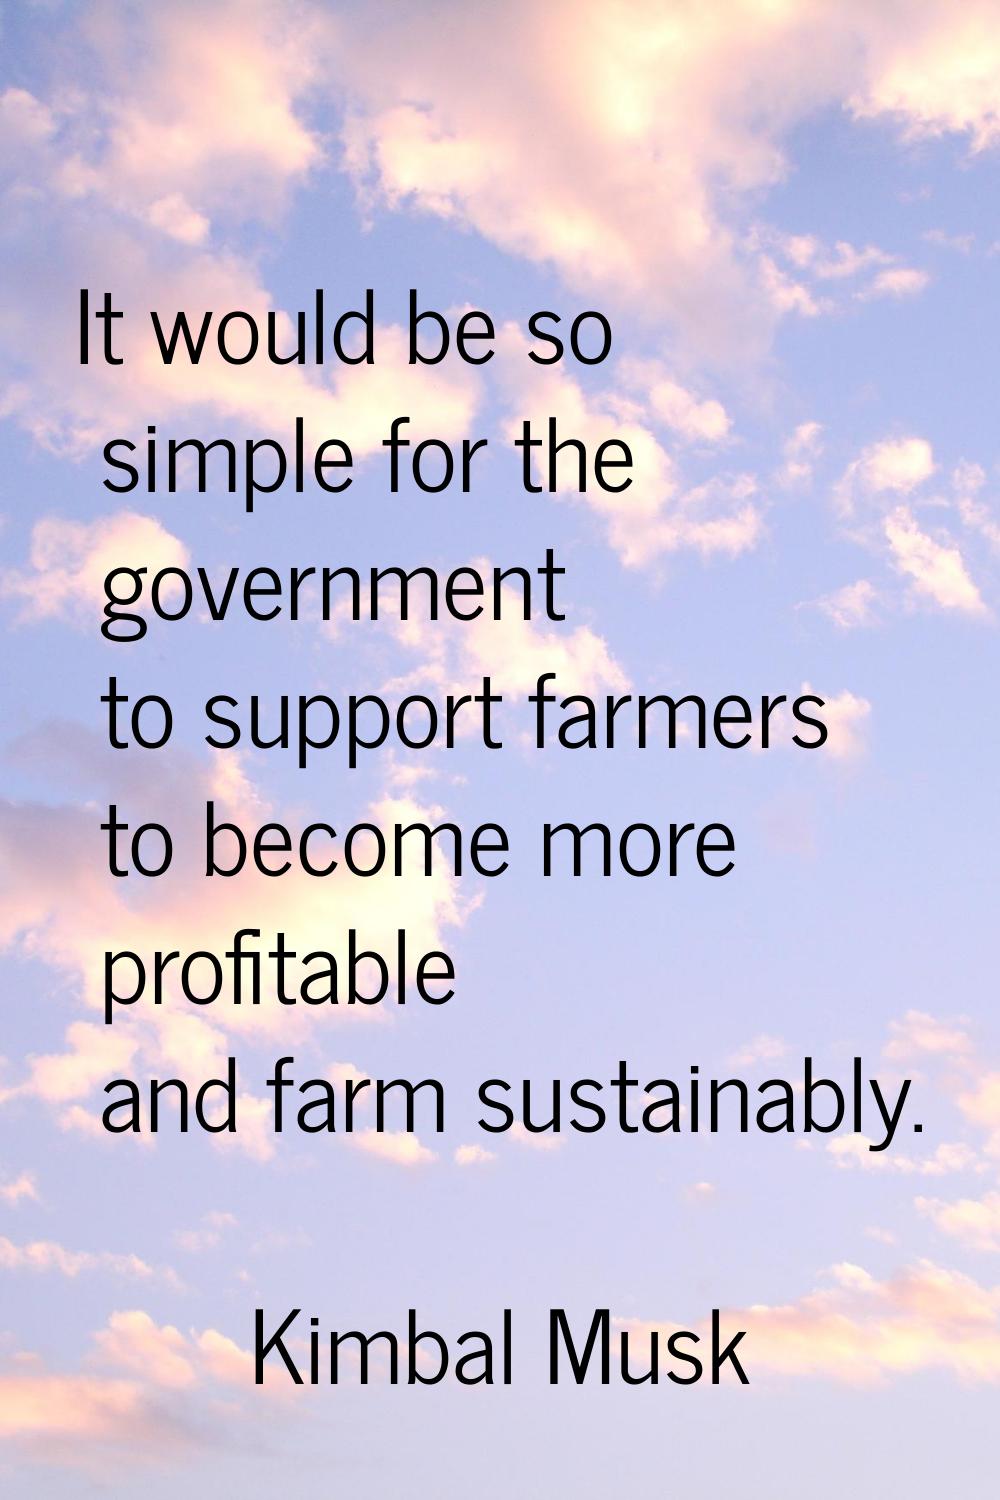 It would be so simple for the government to support farmers to become more profitable and farm sust